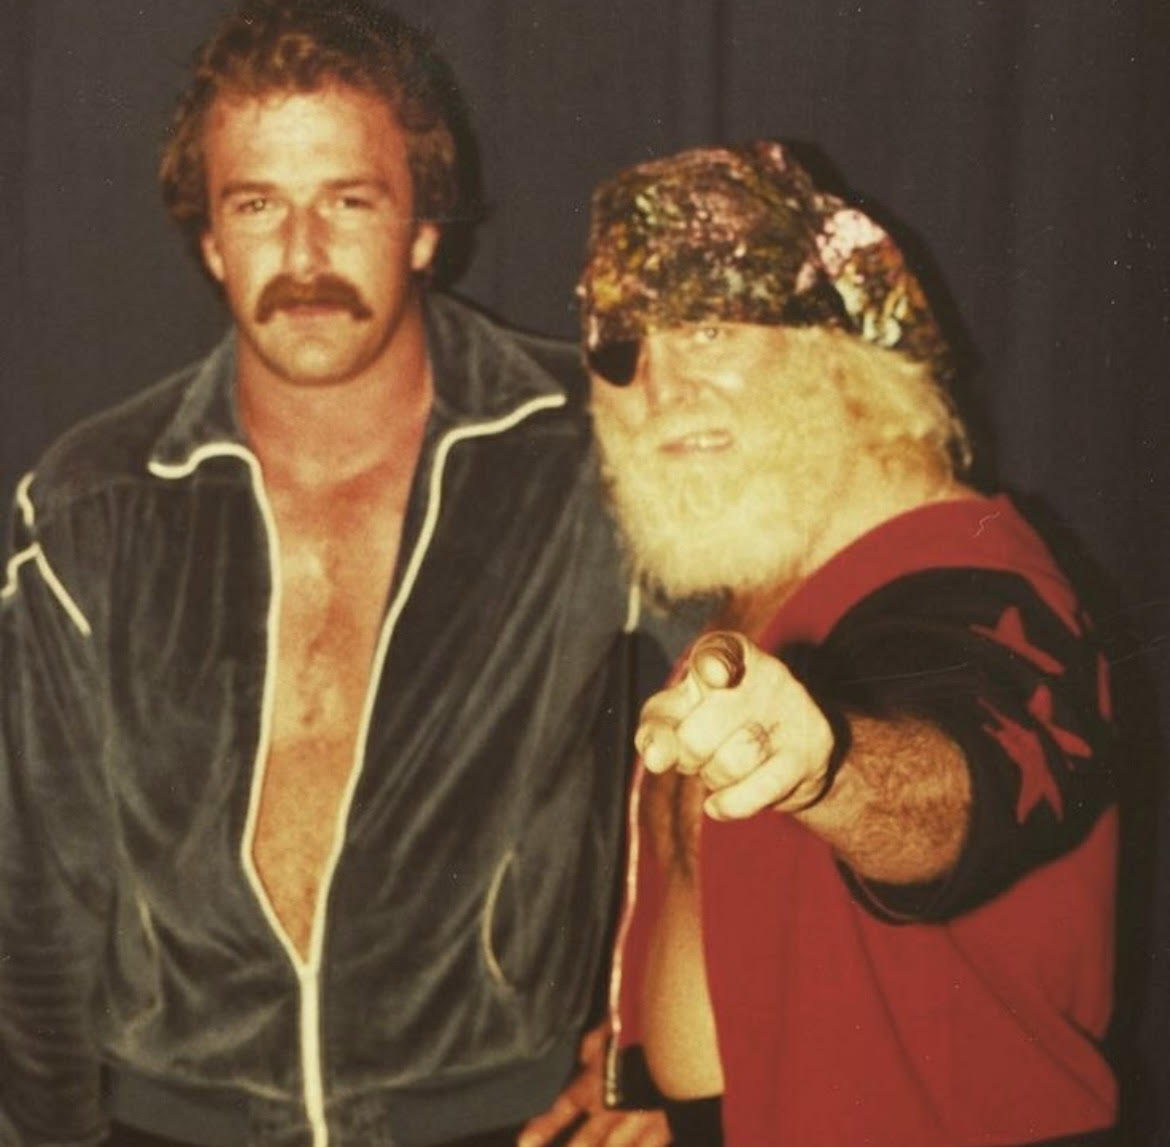 Great shot with Boogie Woogie back in 1982 during the Mid-Atlantic days! One of my MANY tag team partners while I was working in Charlotte. #TrustME #AEW